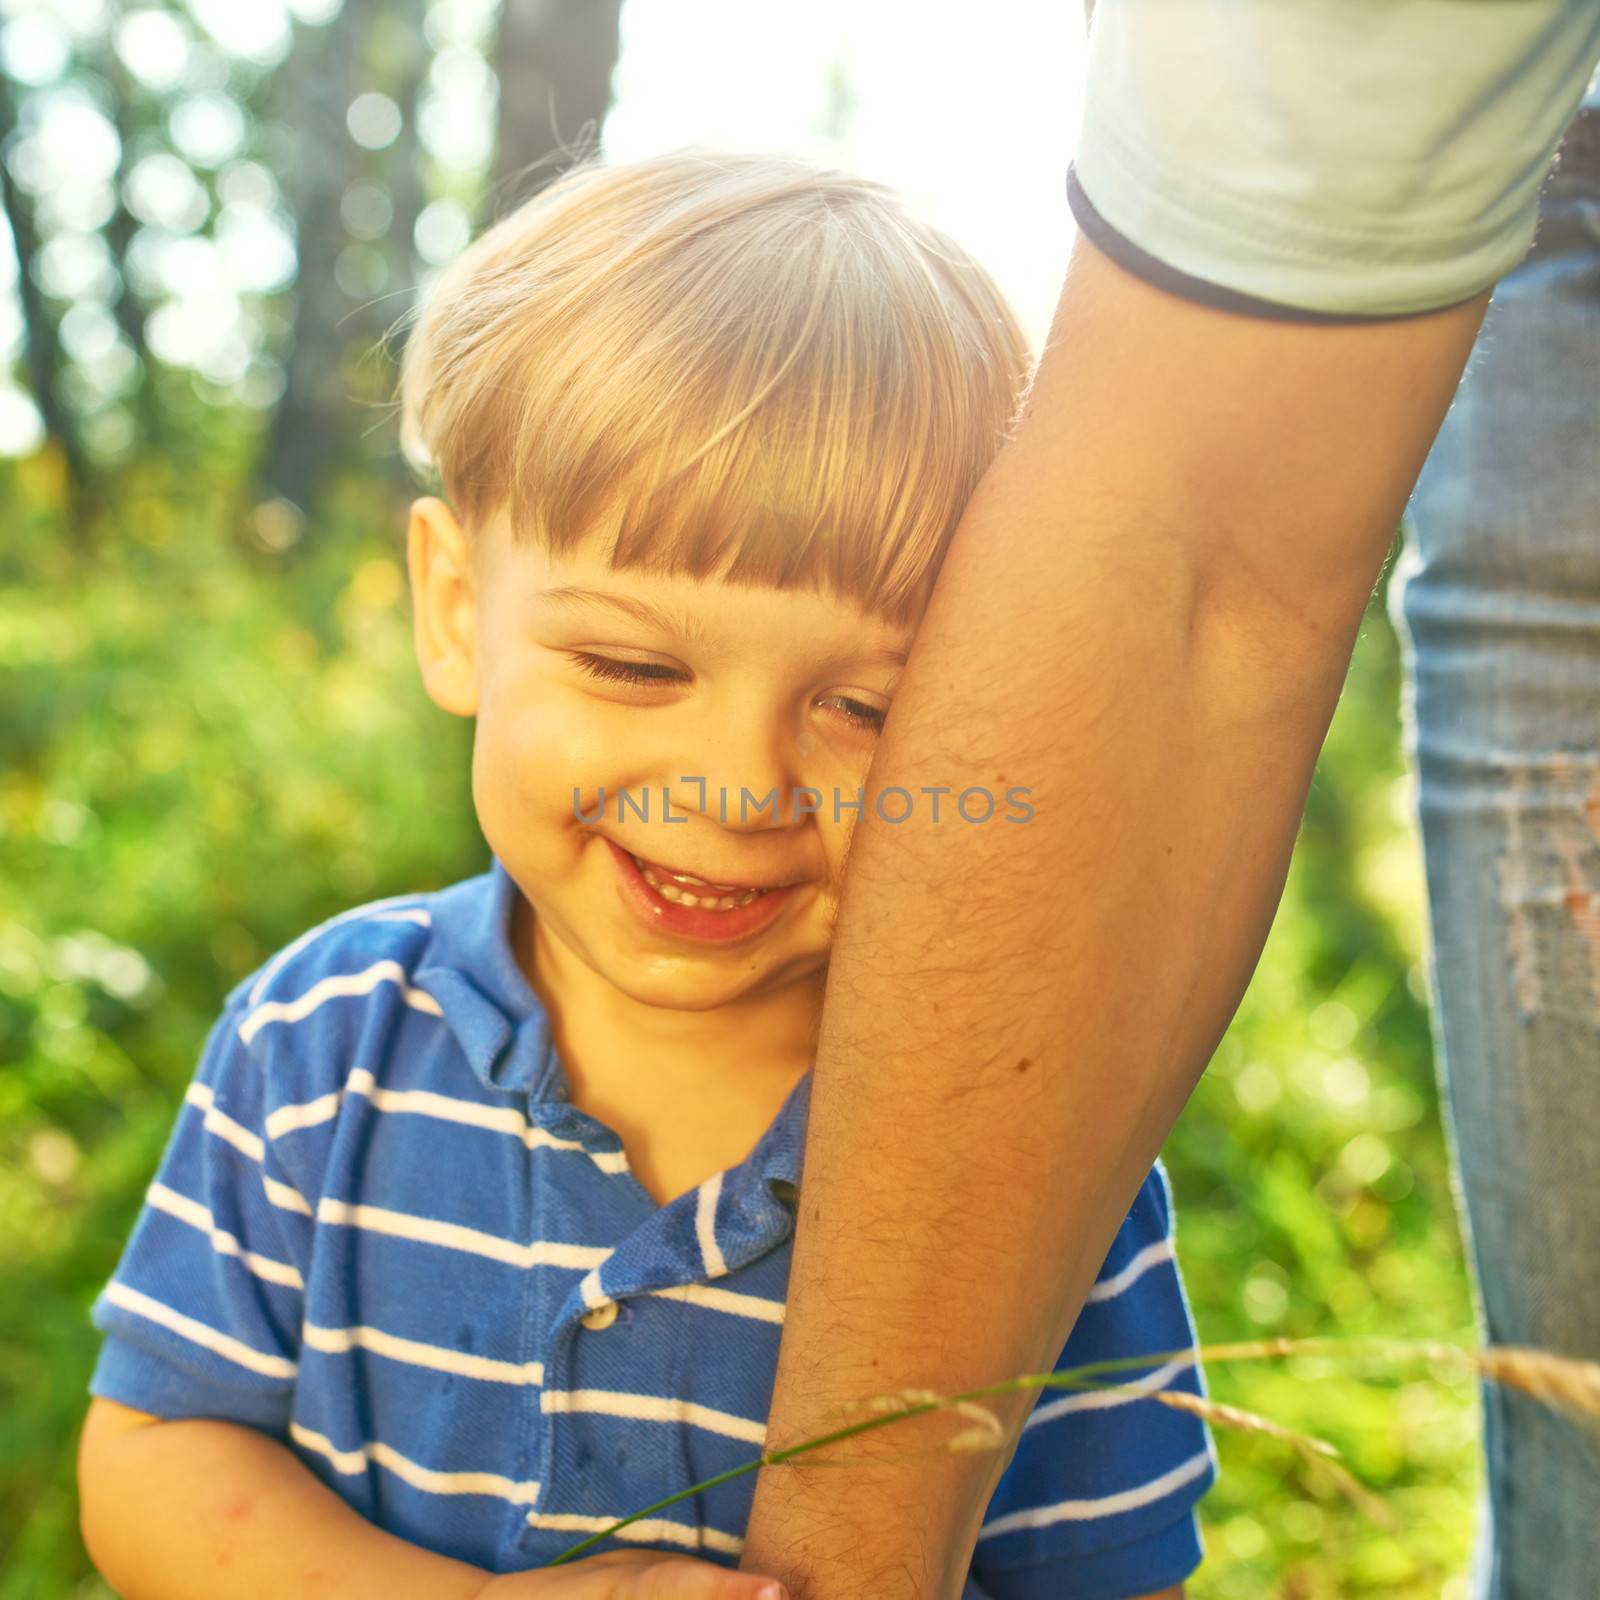 Smiling boy holding father's hand